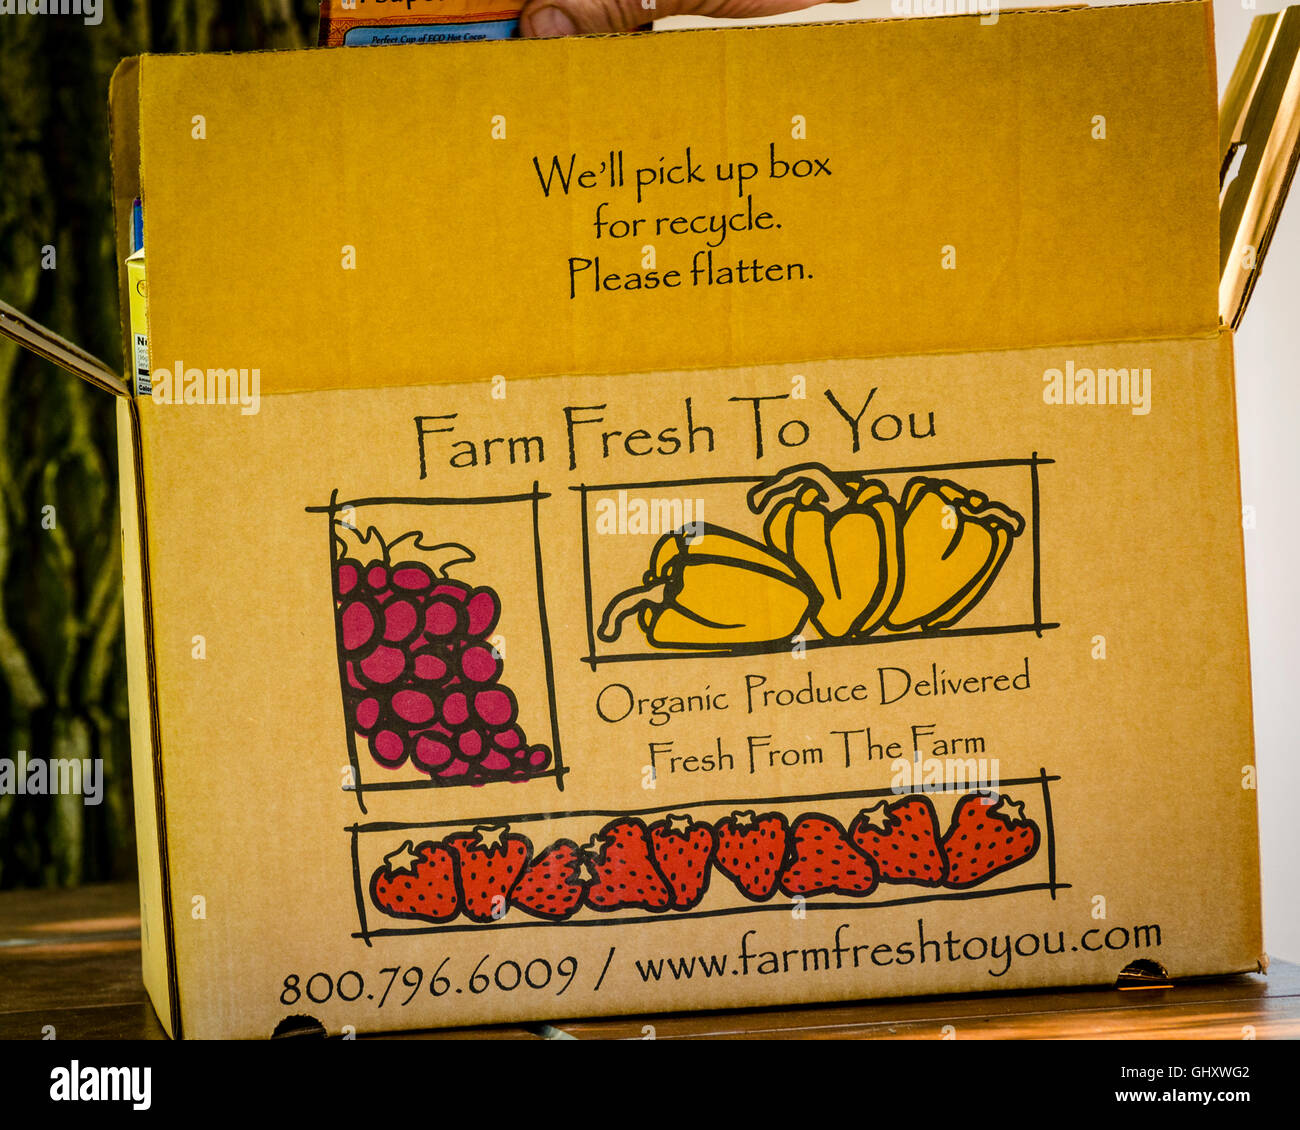 A Farm Fresh To You Box That Fresh Organic Produce Is Delivered To Stock Photo Alamy